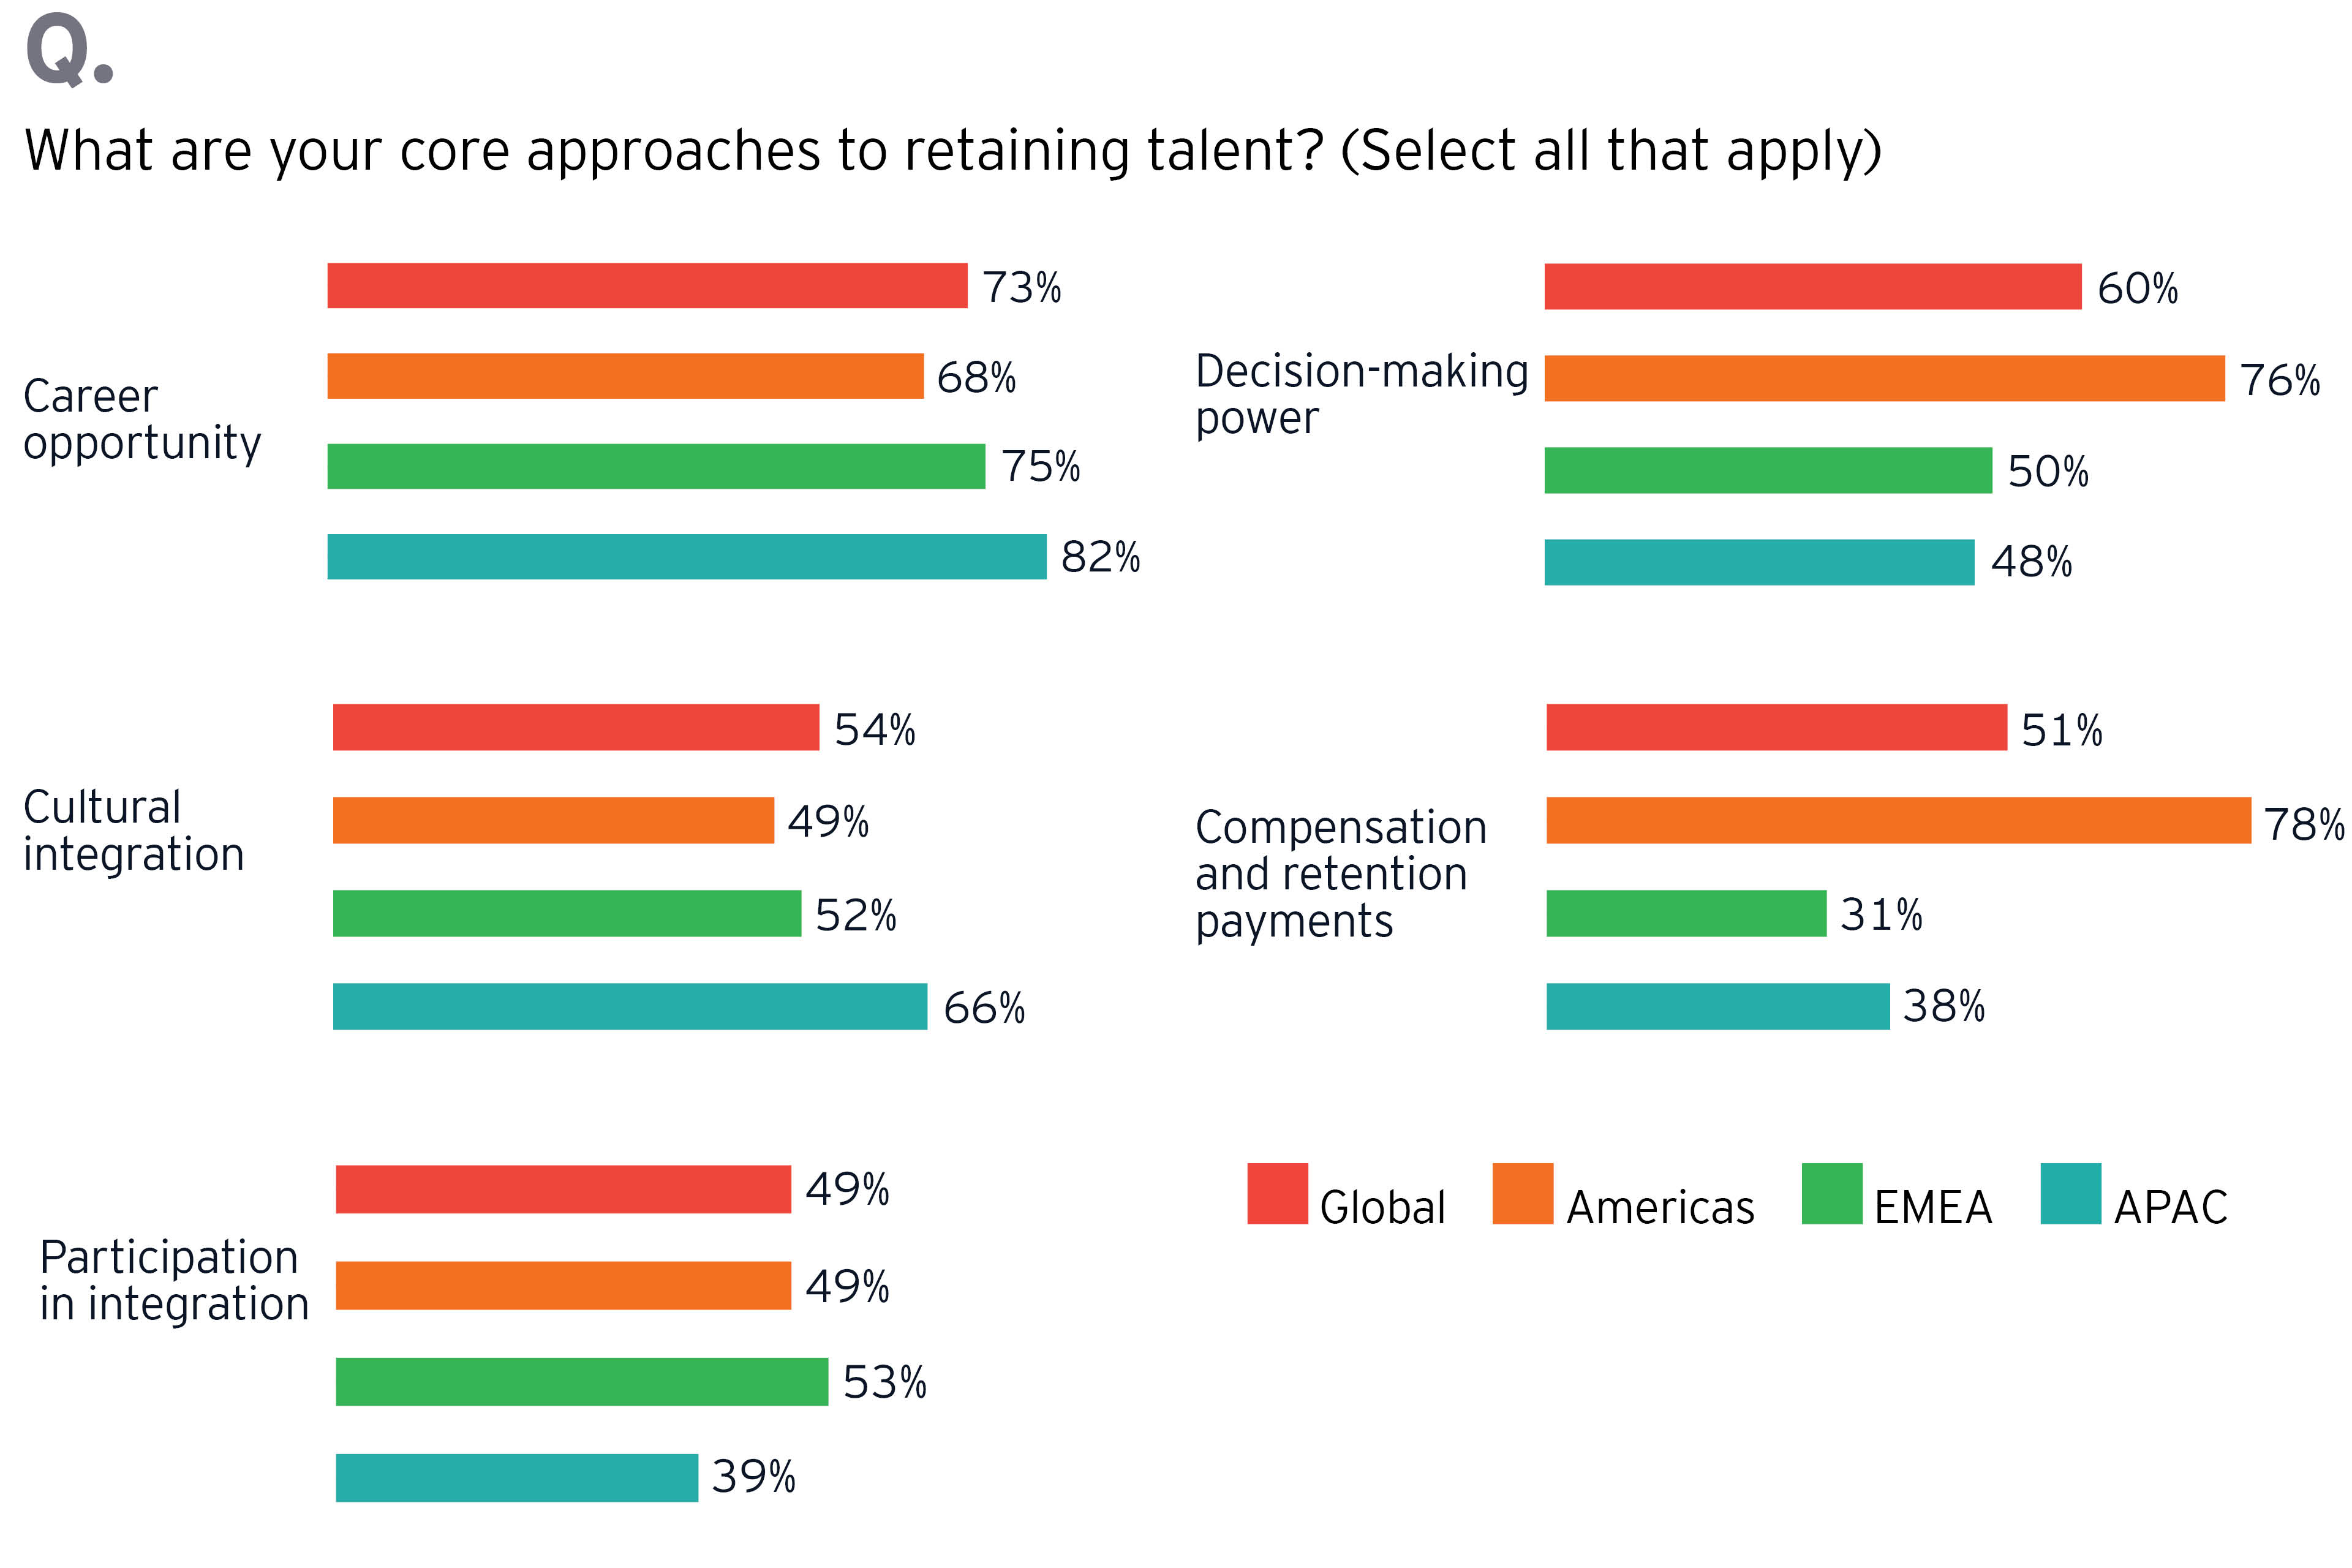 M&A buy and integrate core approaches for retaining talent